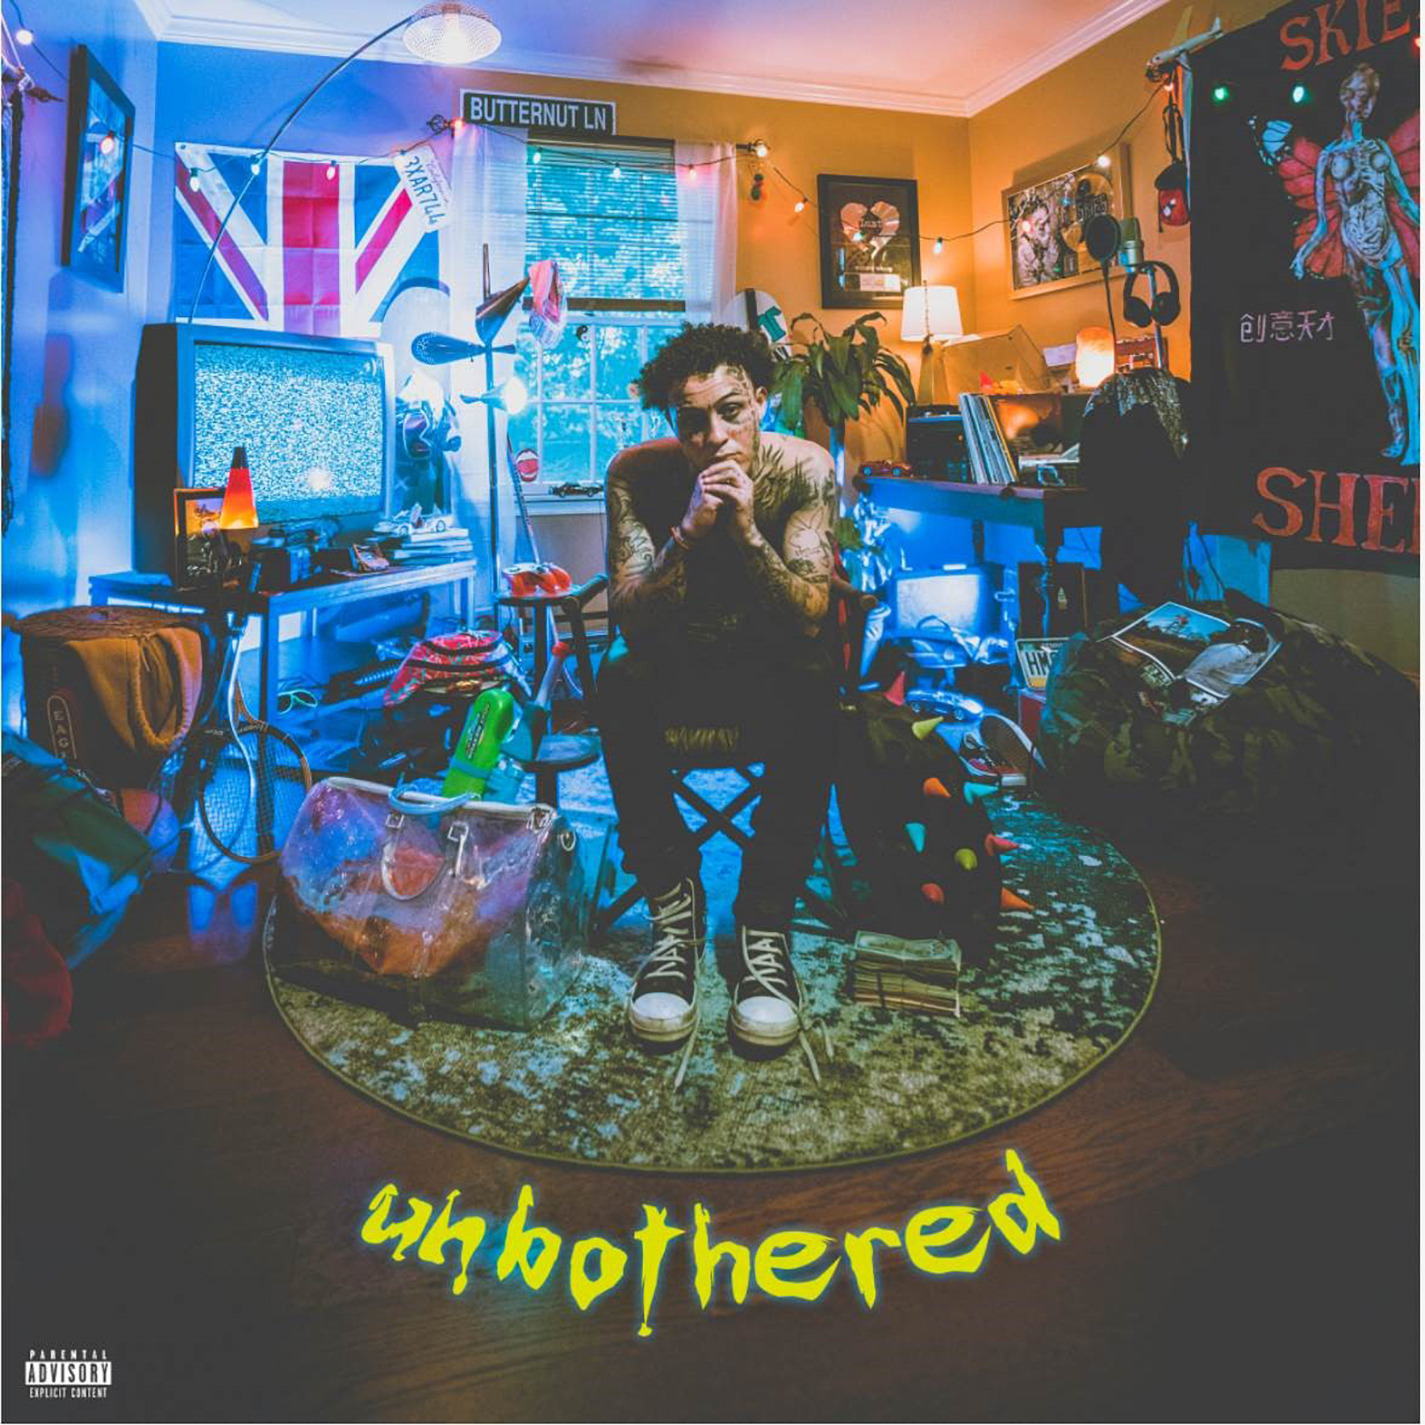 Lil Skies Releases Sophomore Album “Unbothered”